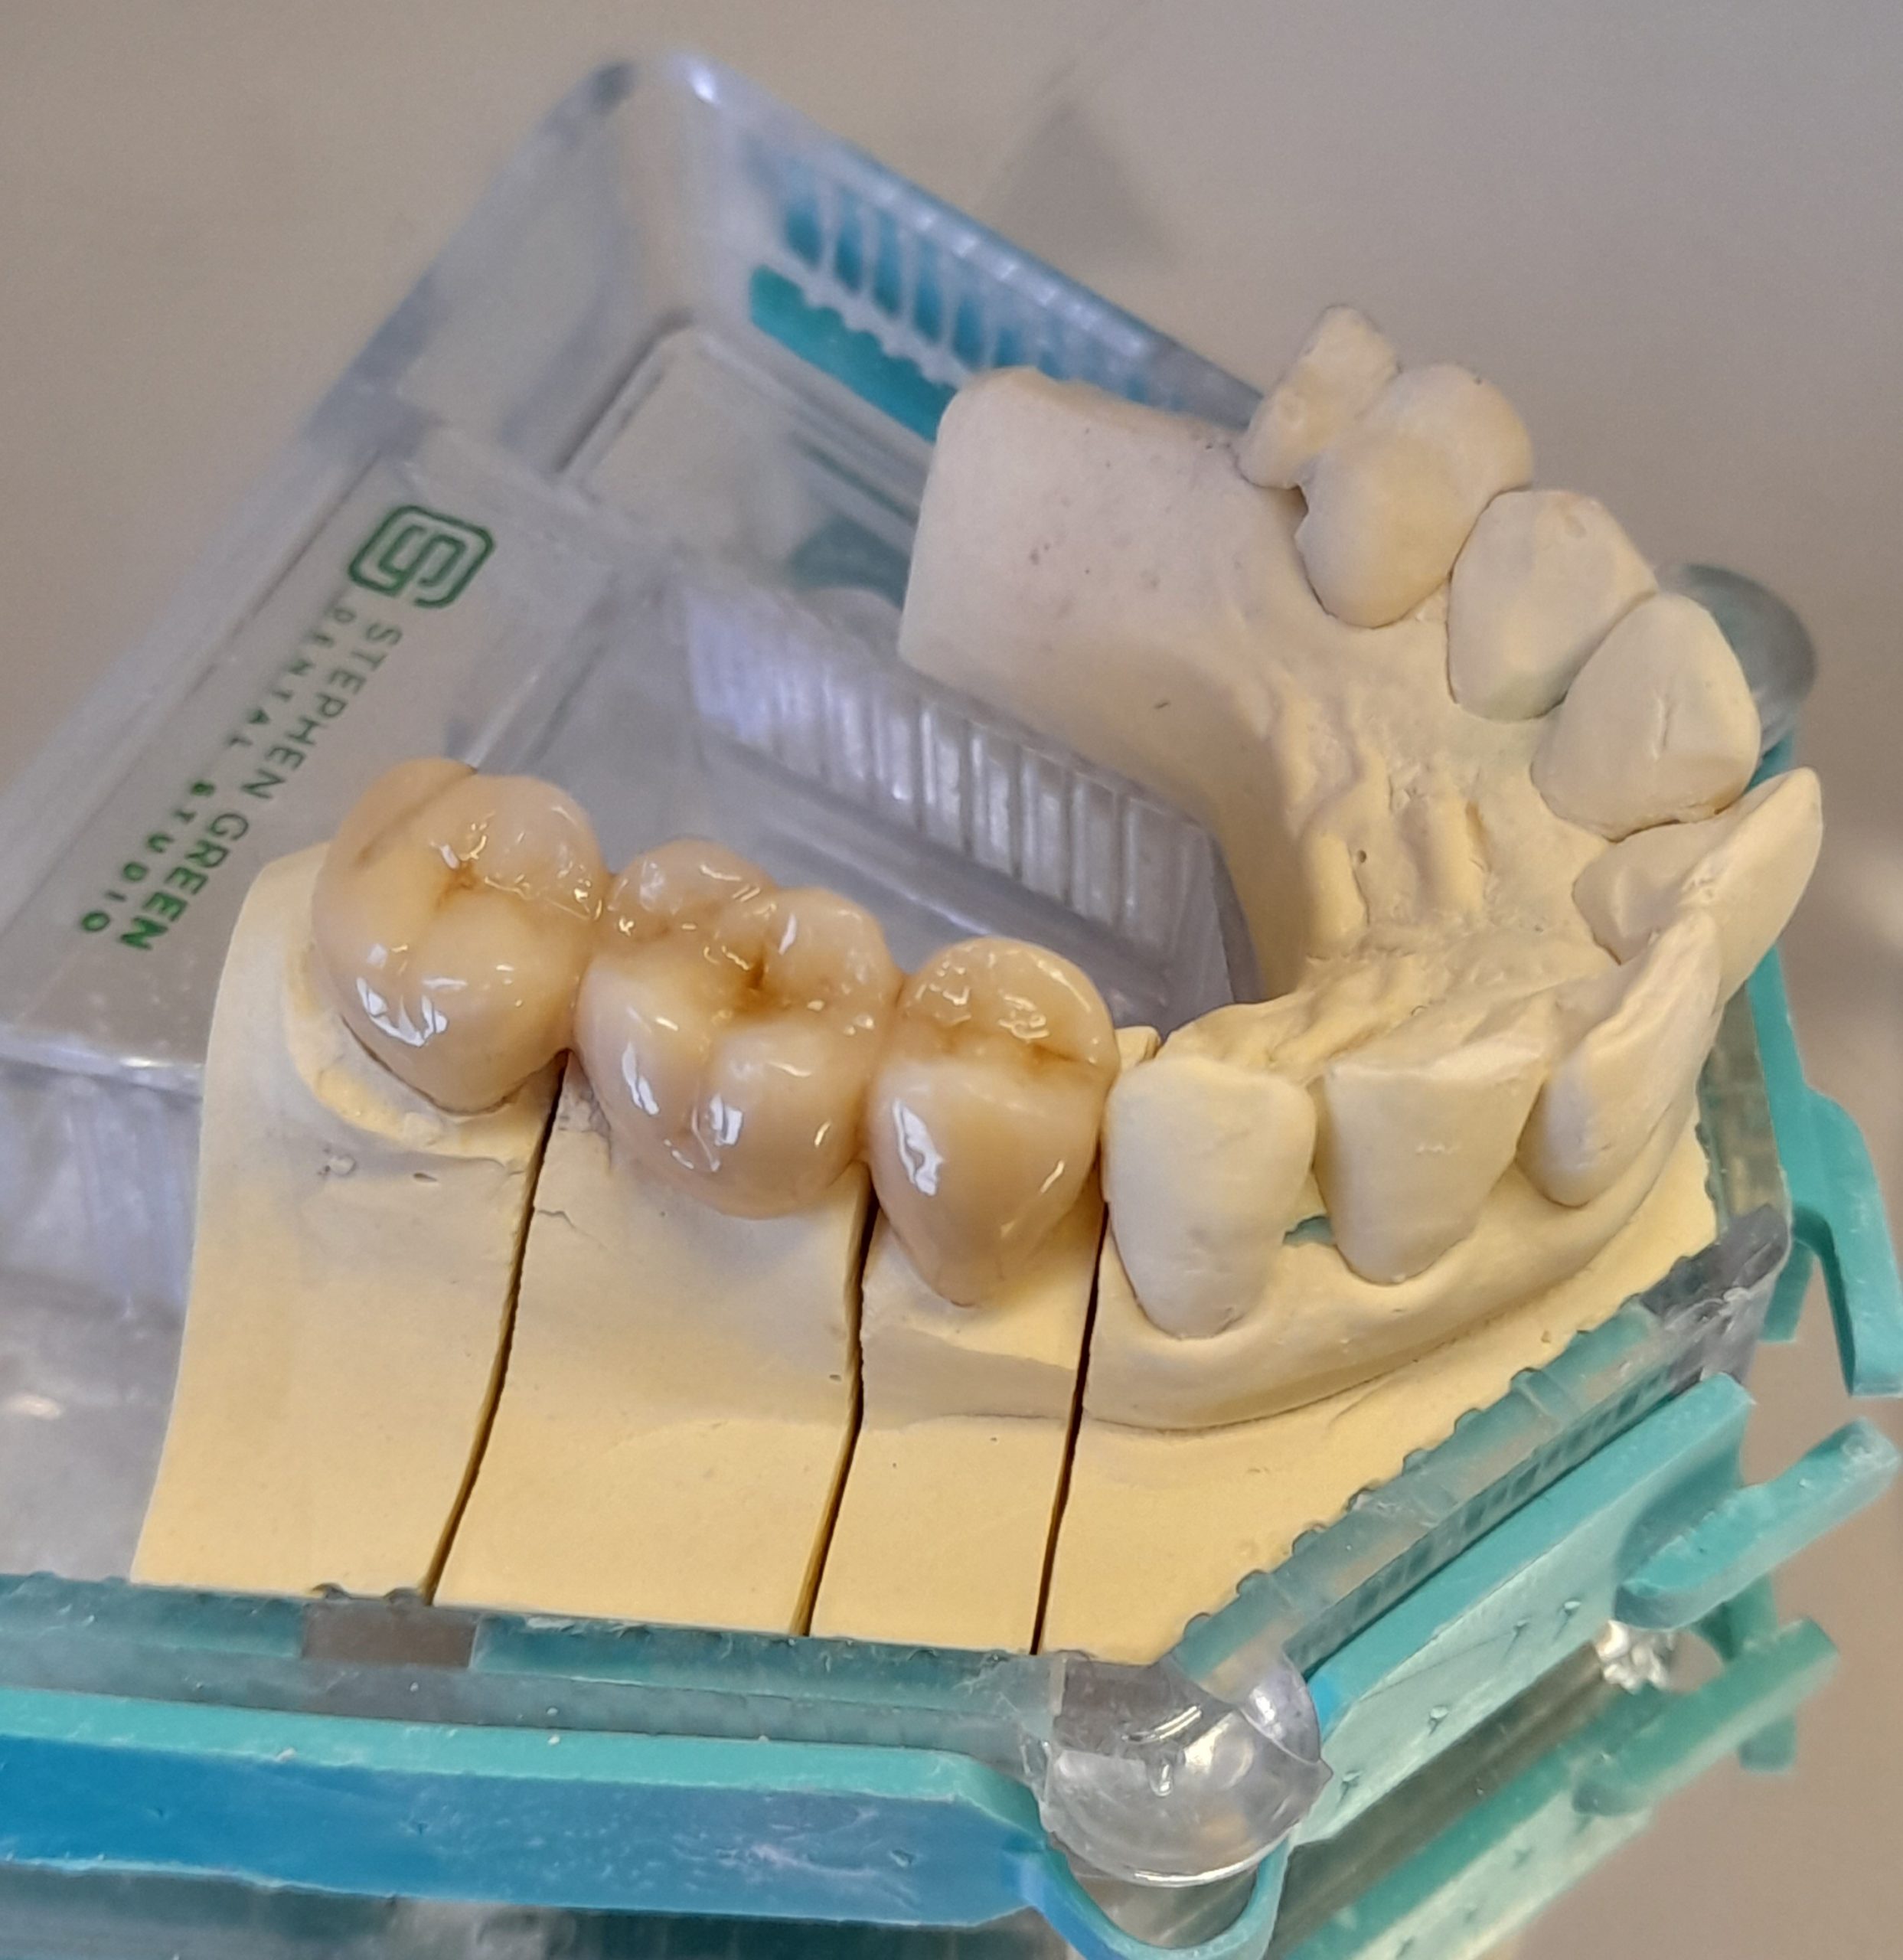 Designed to blend with the natural appearance of patients' teeth